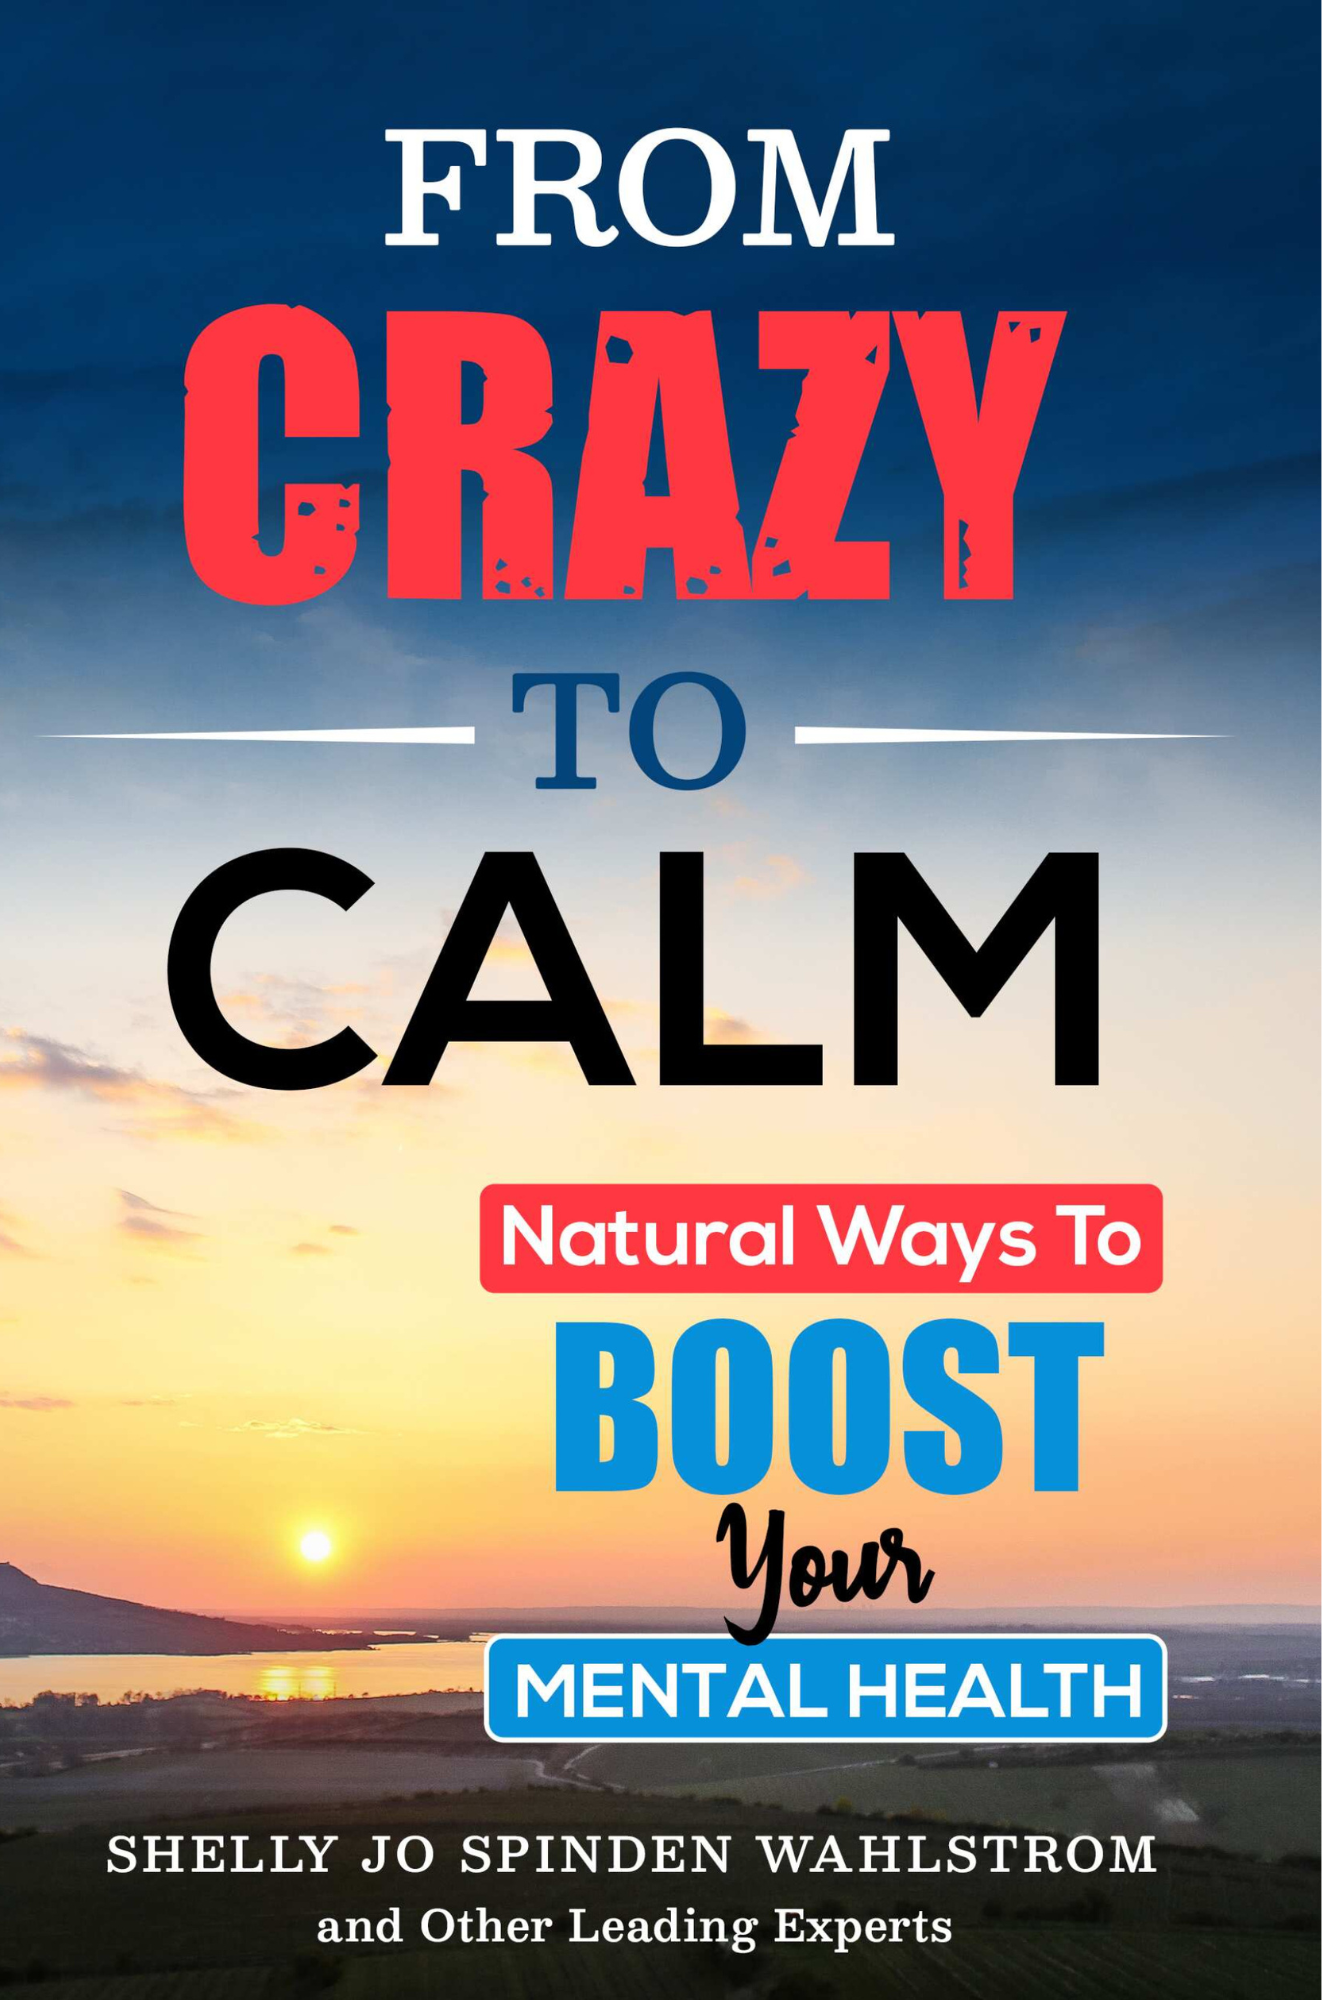 FROM CRAZY TO CALM - NATURAL WAYS TO BOOST YOUR MENTAL HEALTH BOOK